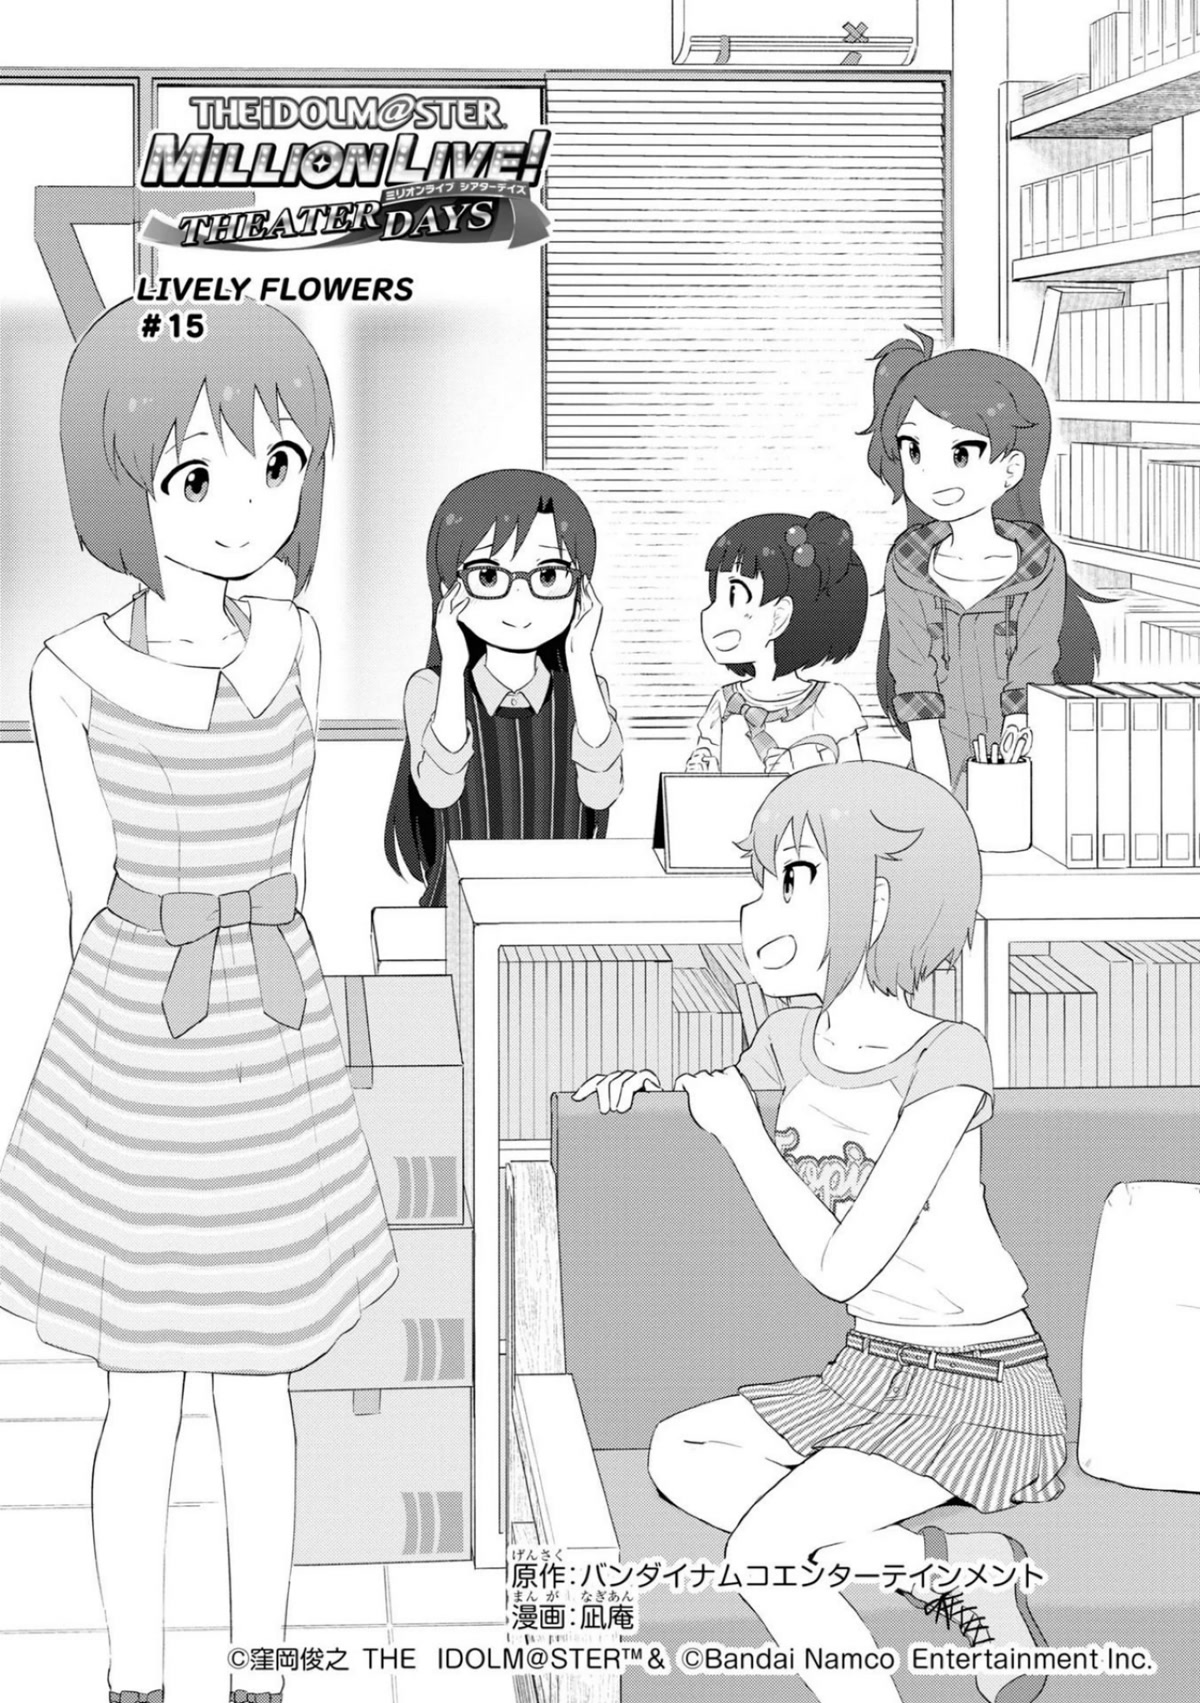 The Idolm@ster Million Live! Theater Days - Lively Flowers - Page 1